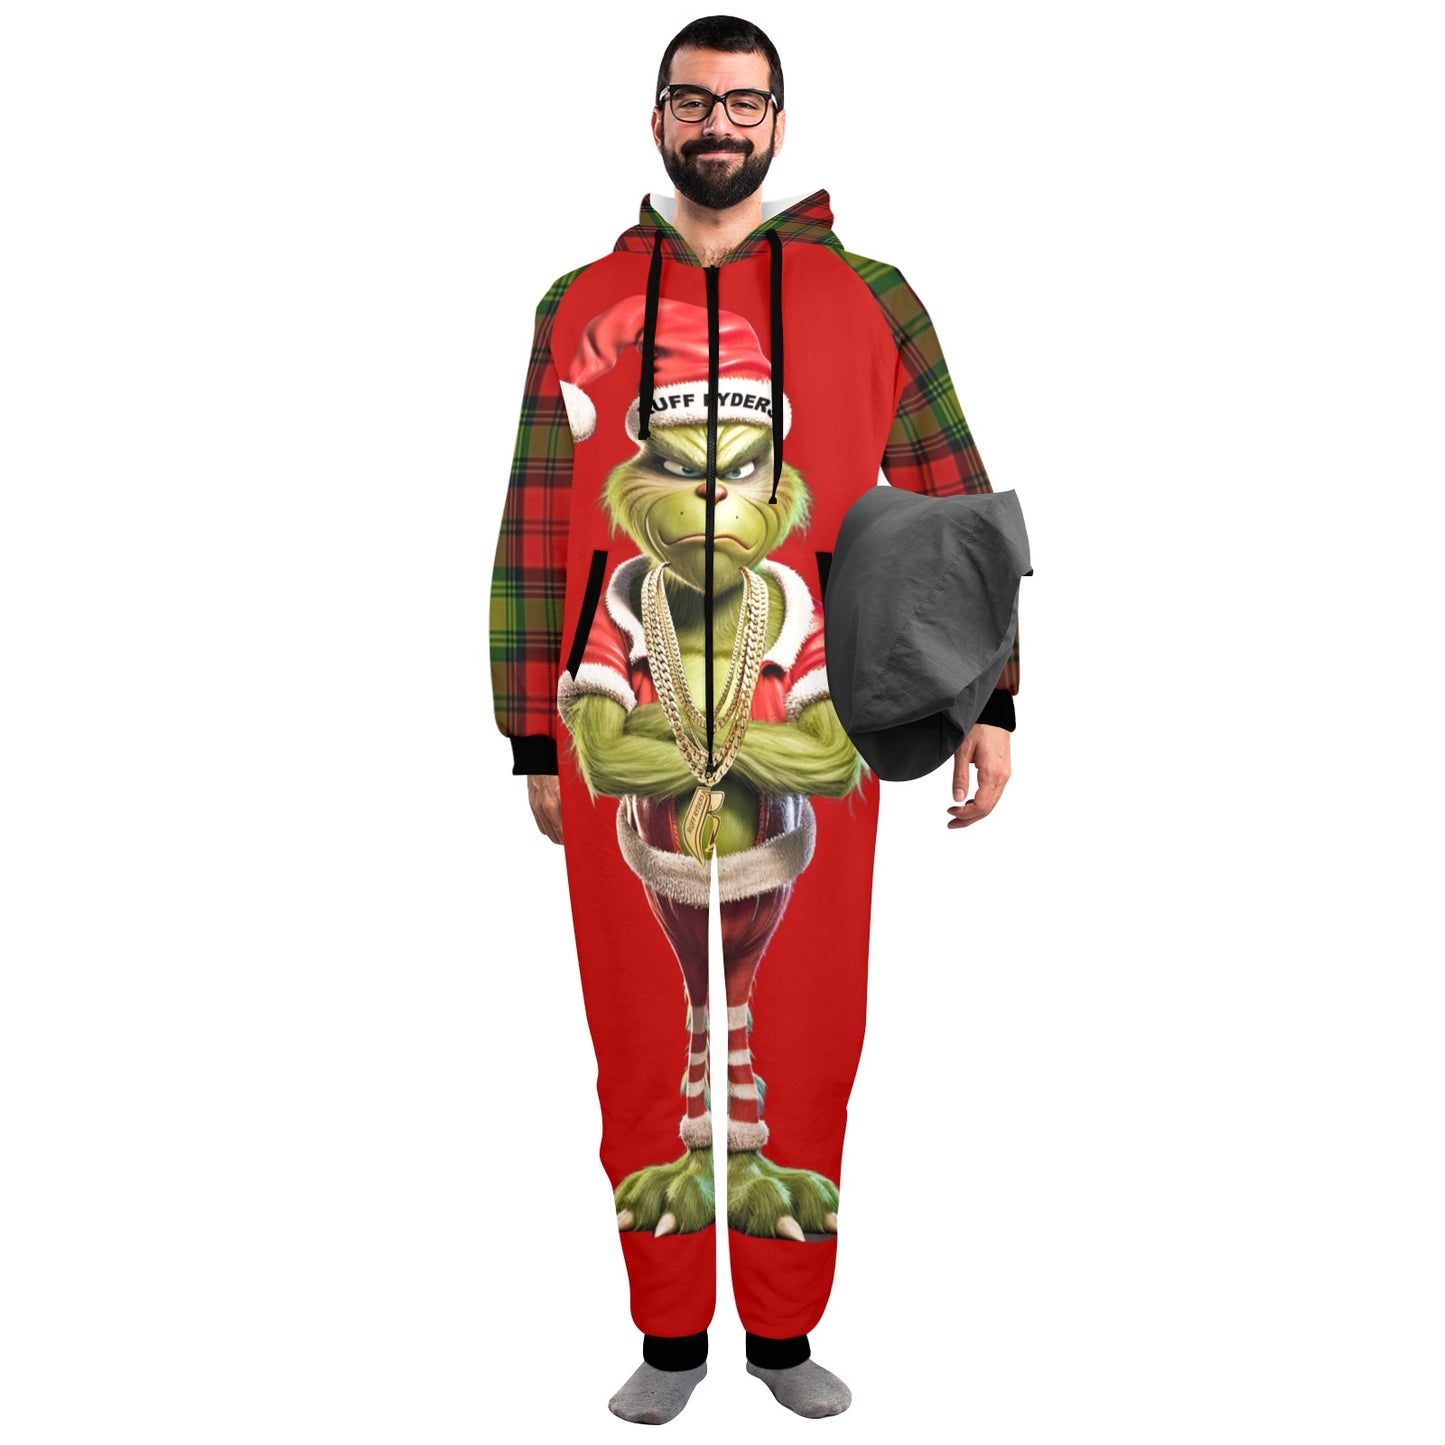 RR One-Piece Zip Up Hooded Pajamas - Grinch